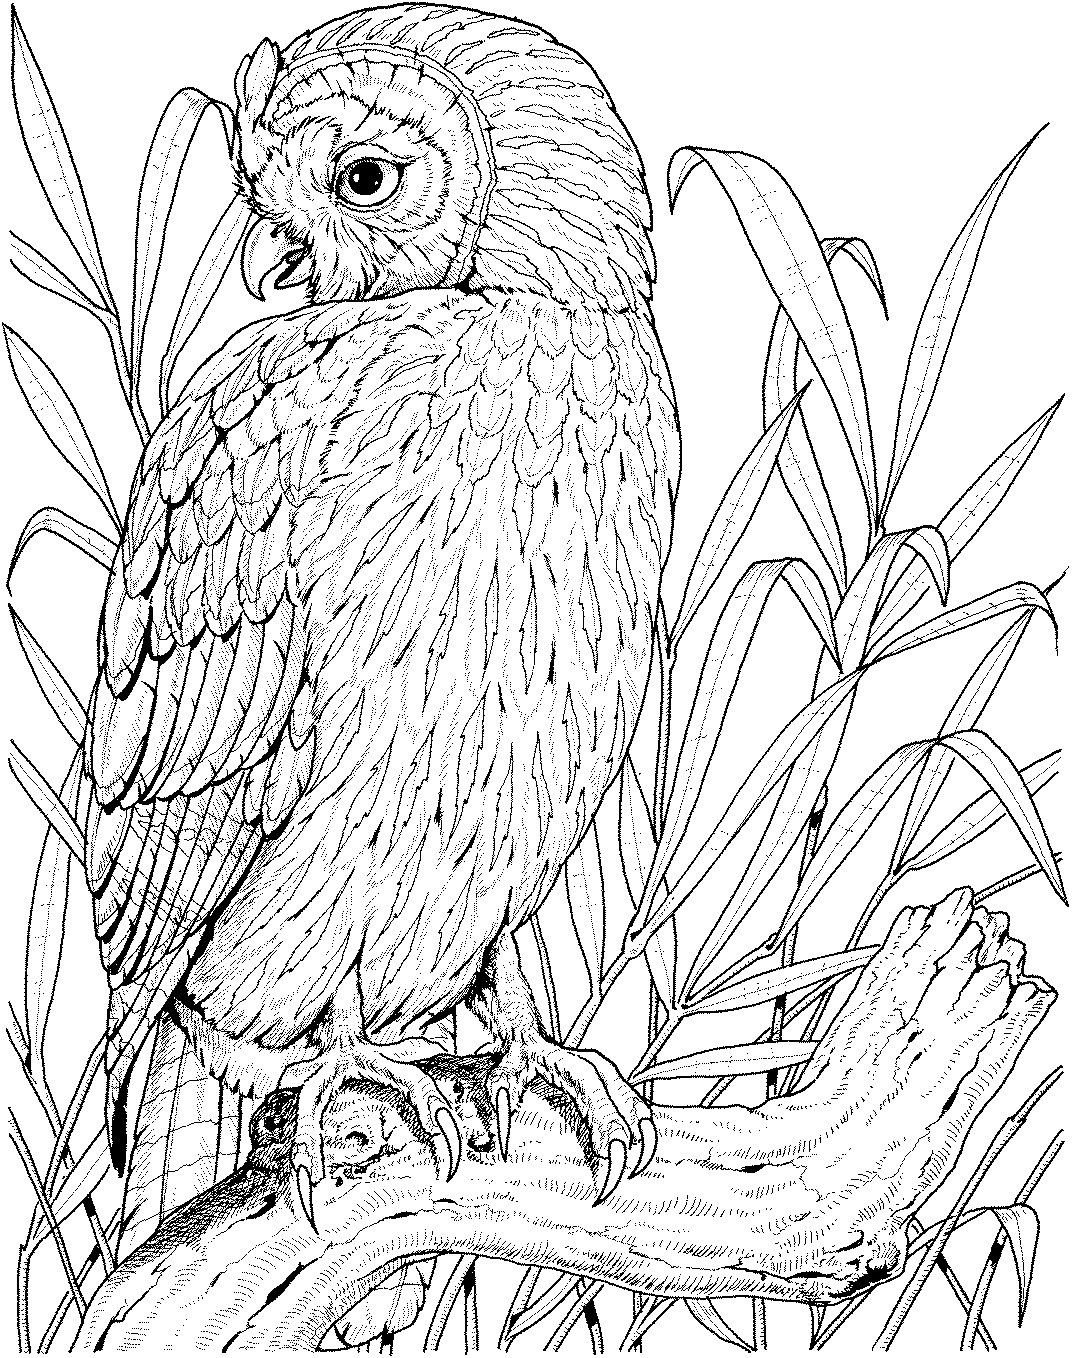 Owl Adult Coloring Pages
 Owl Coloring Pages